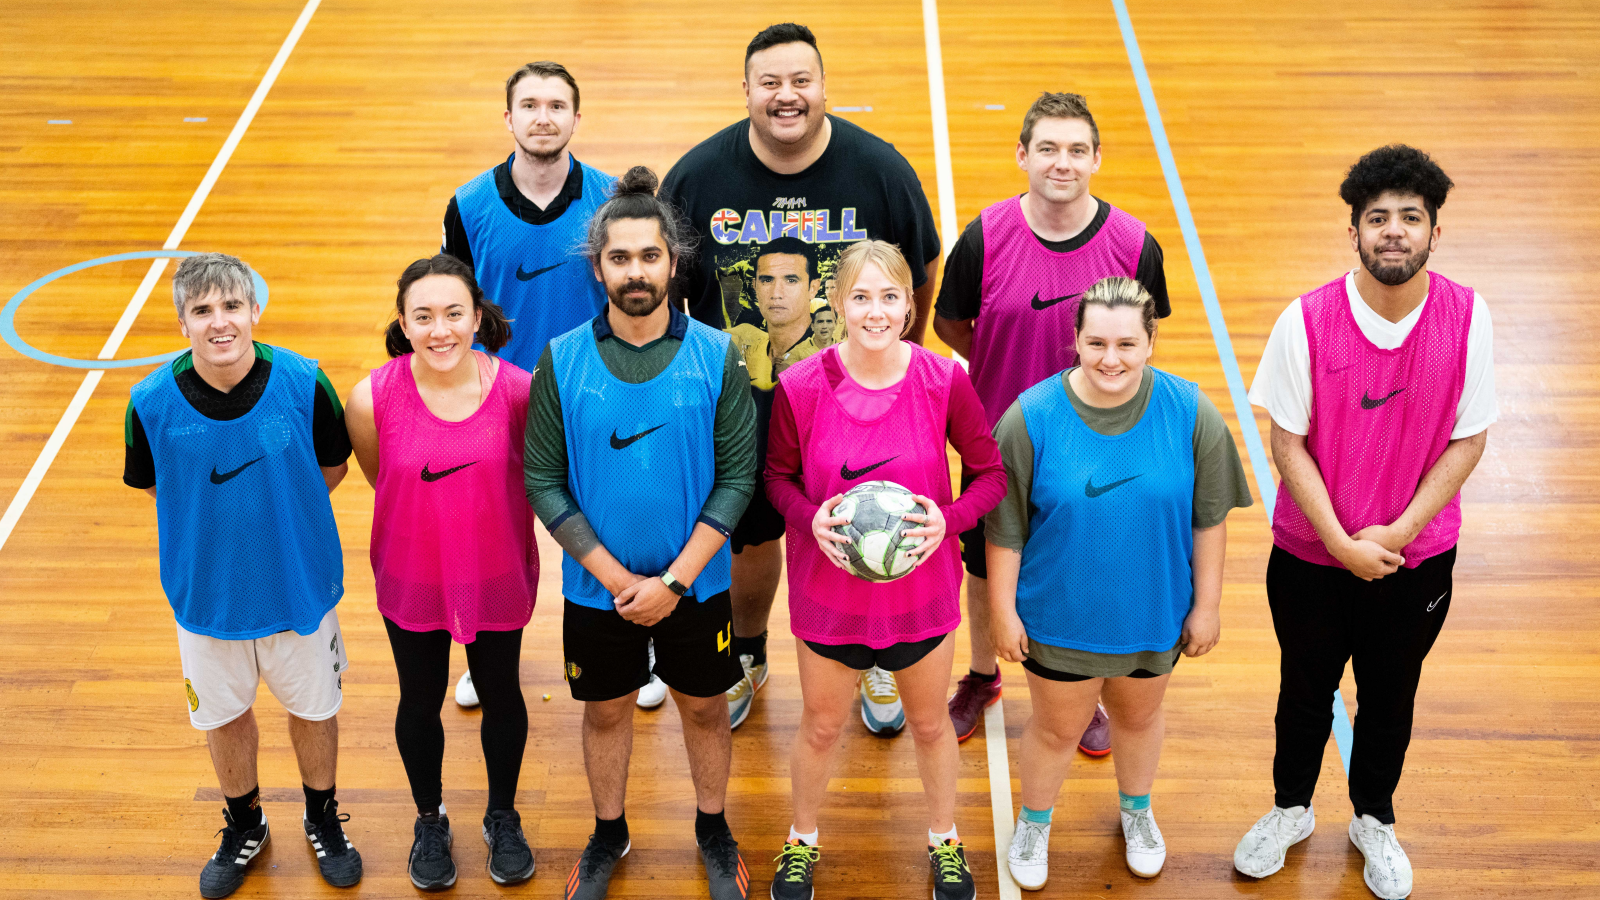 A group of people in sportswear stand on a court smiling at the camera.